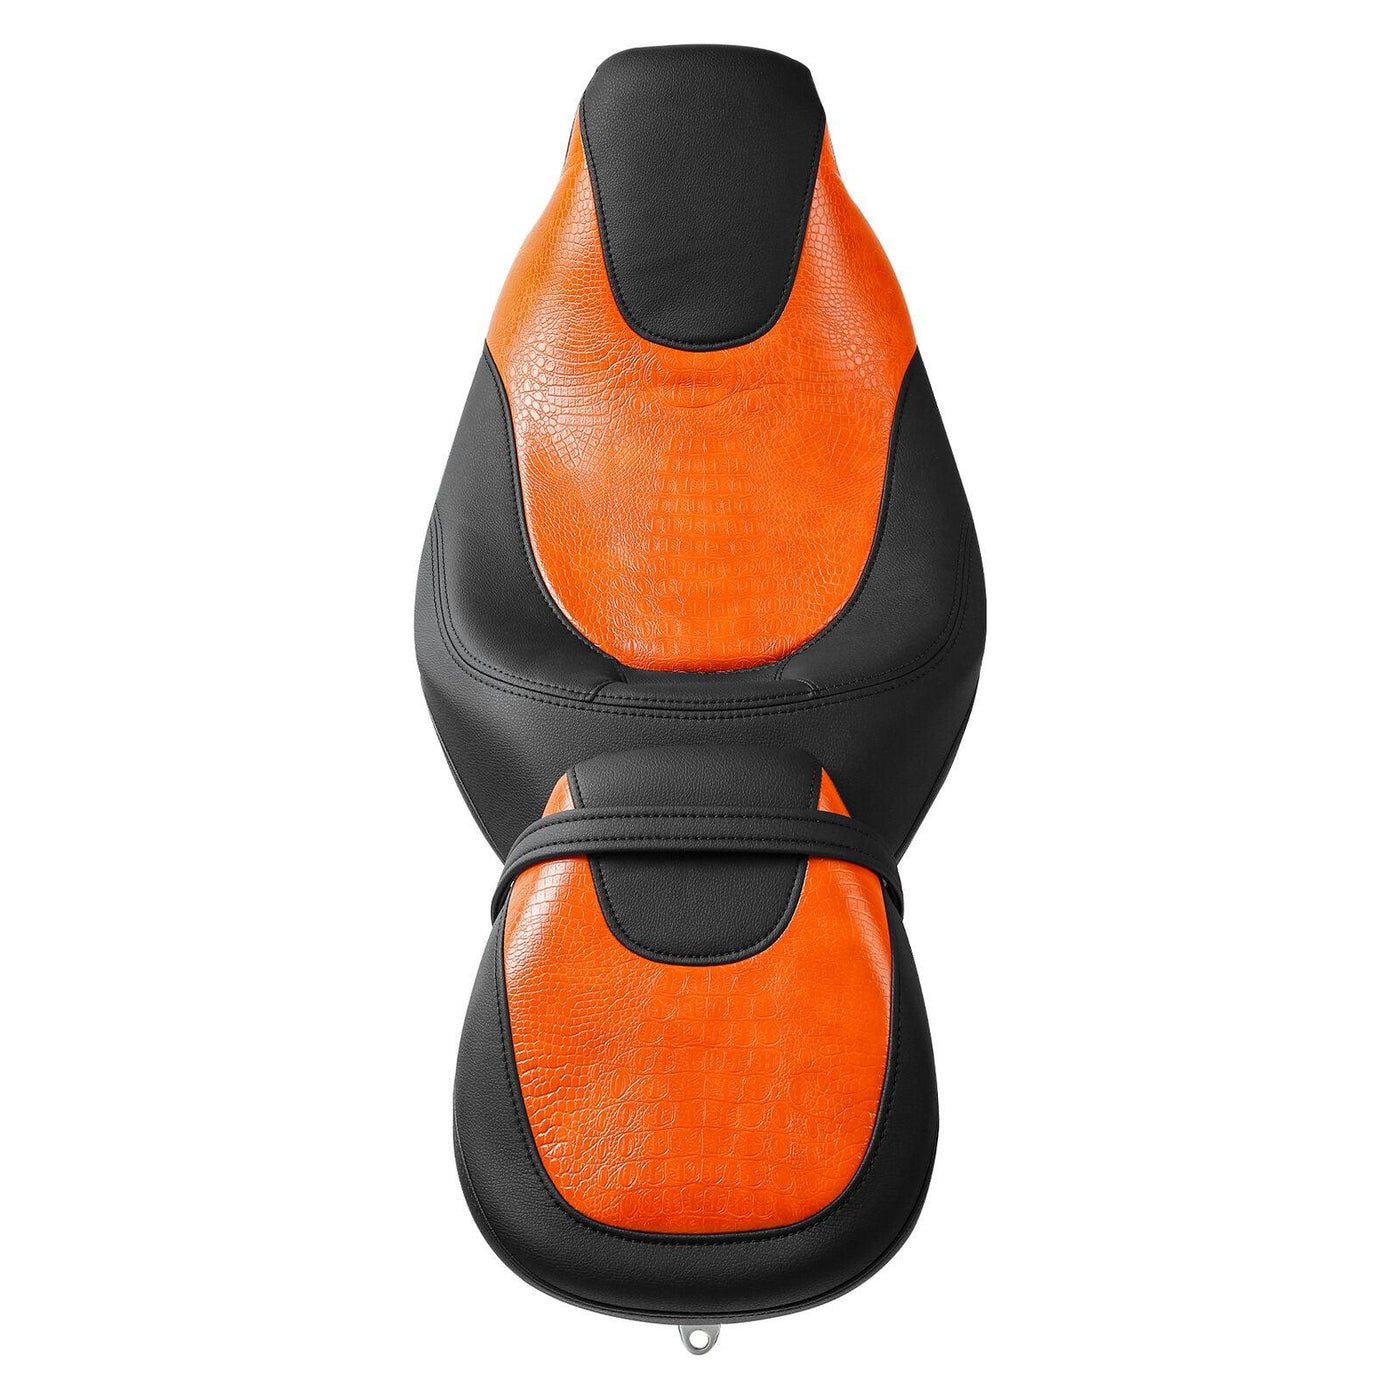 Black Orange Driver Passenger Seat Fit For Harley Touring CVO Road Glide 2009-22 - Moto Life Products